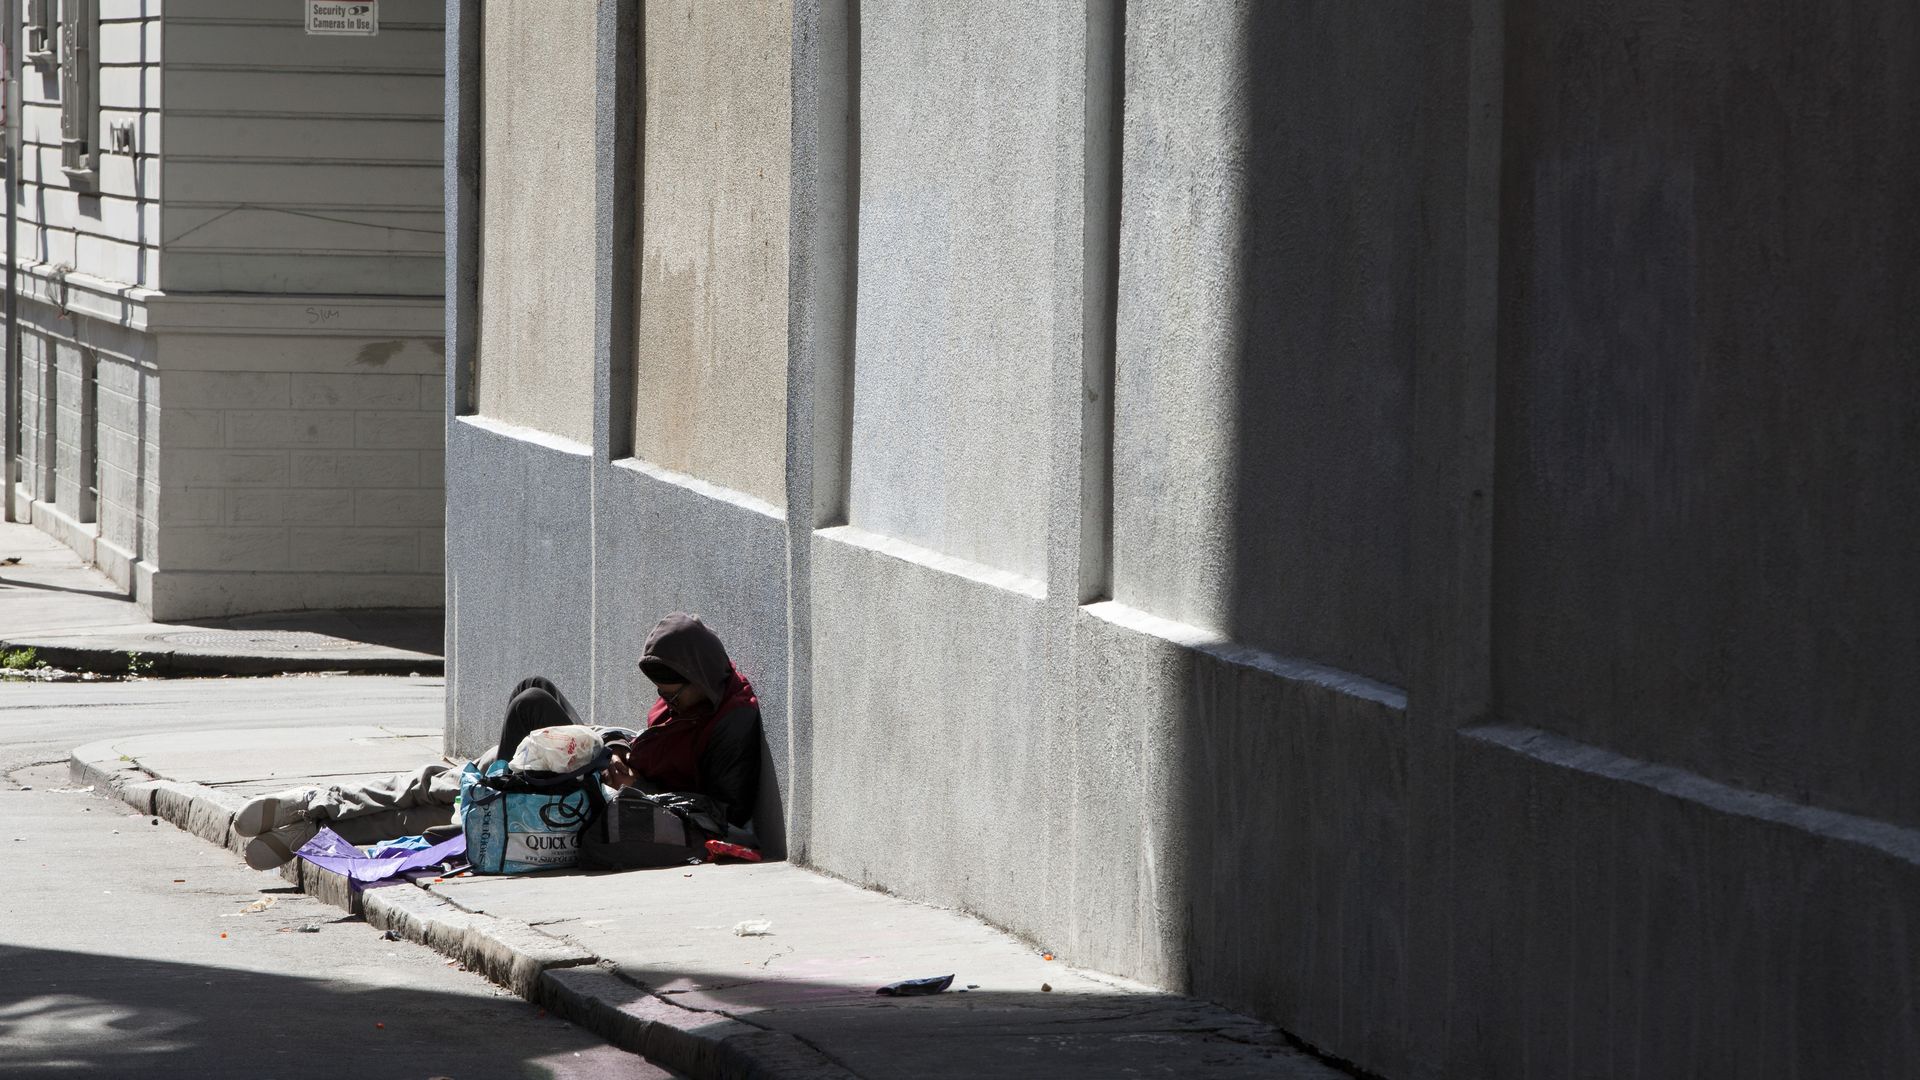 A homeless person on a San Francisco street